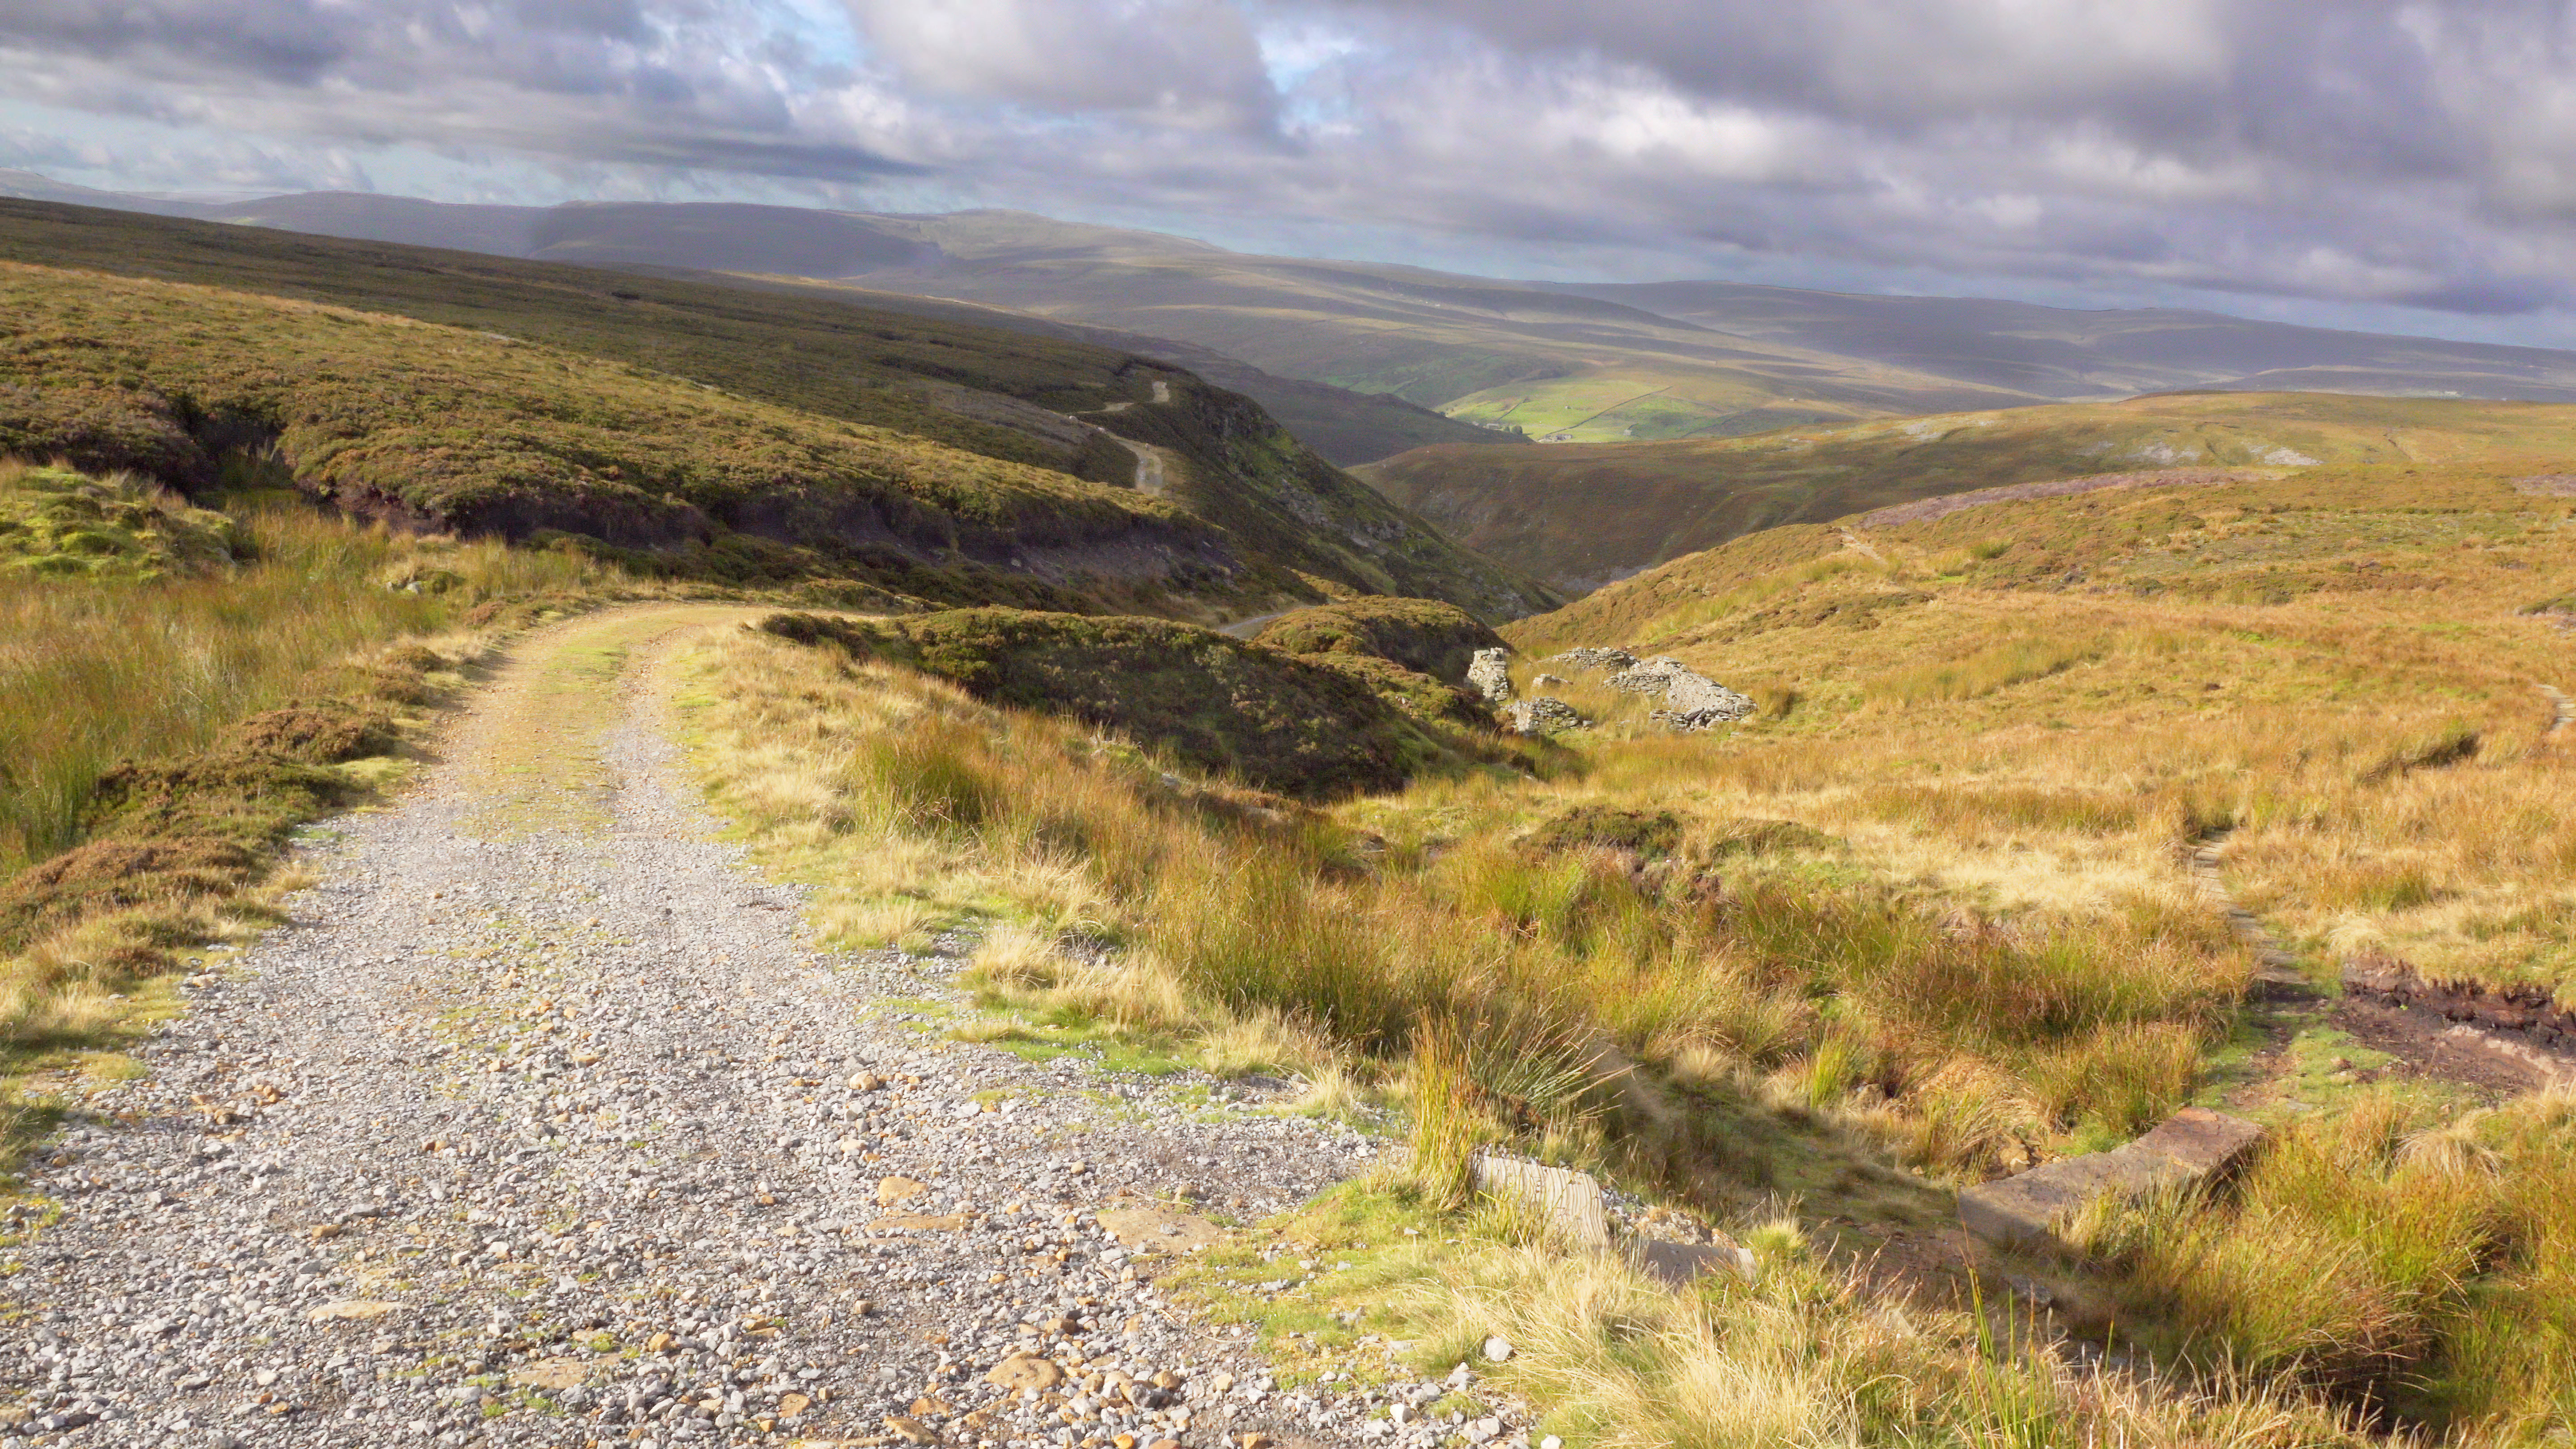 Follow in the footsteps of James Herriot on a stunning walk through the Yorkshire Dales.